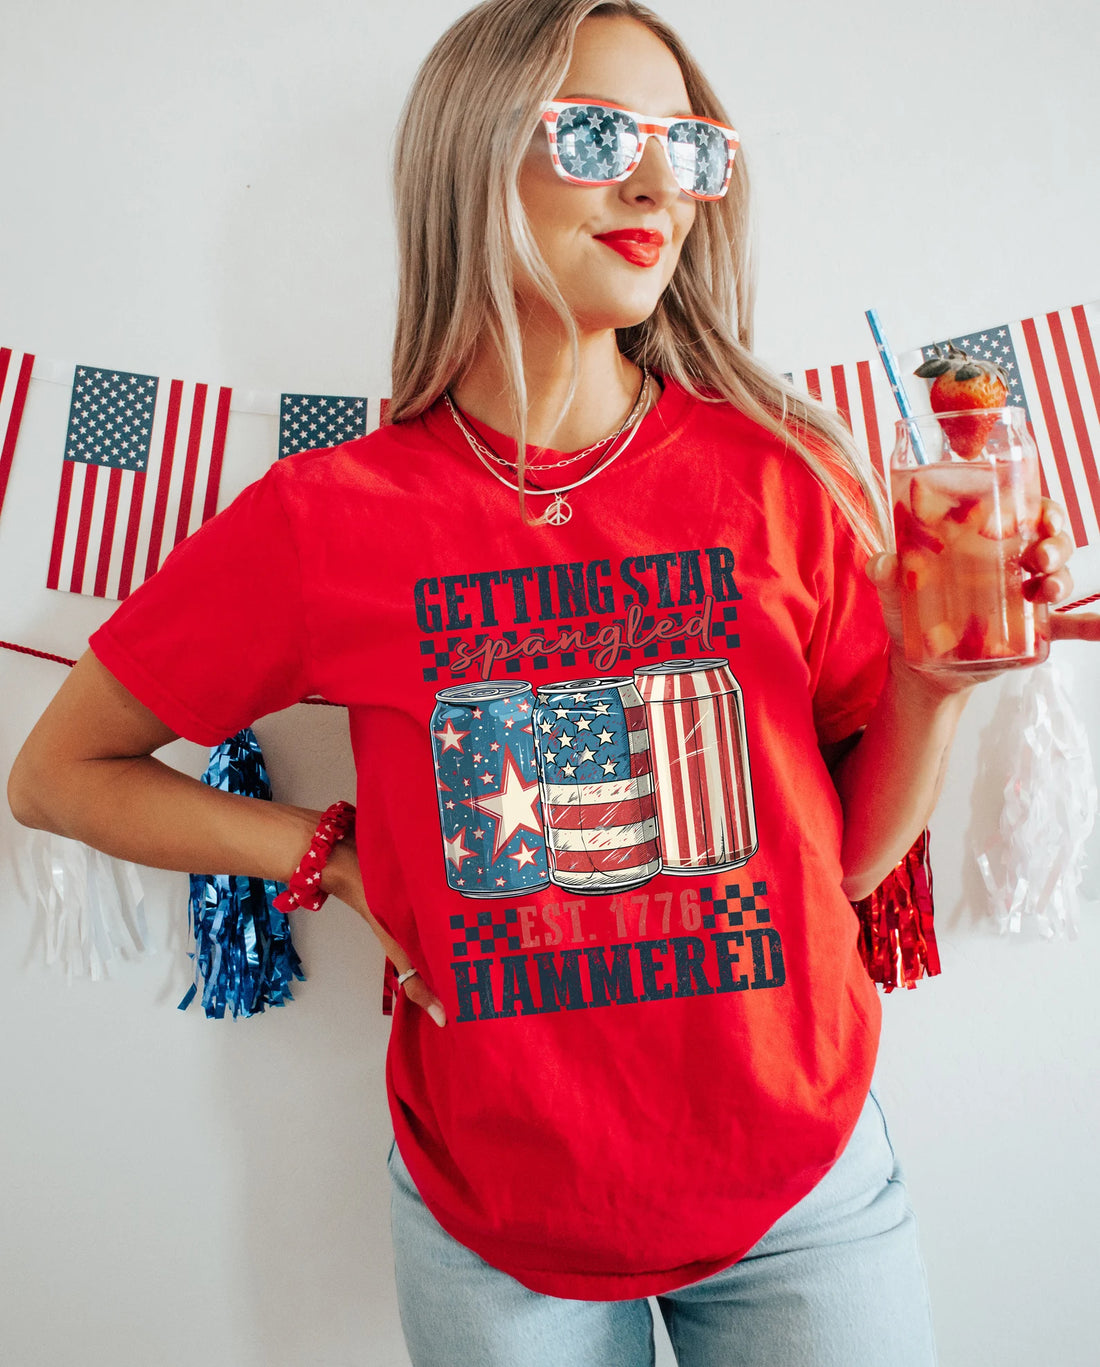 Getting Star Spangled Hammered Full Color Transfer